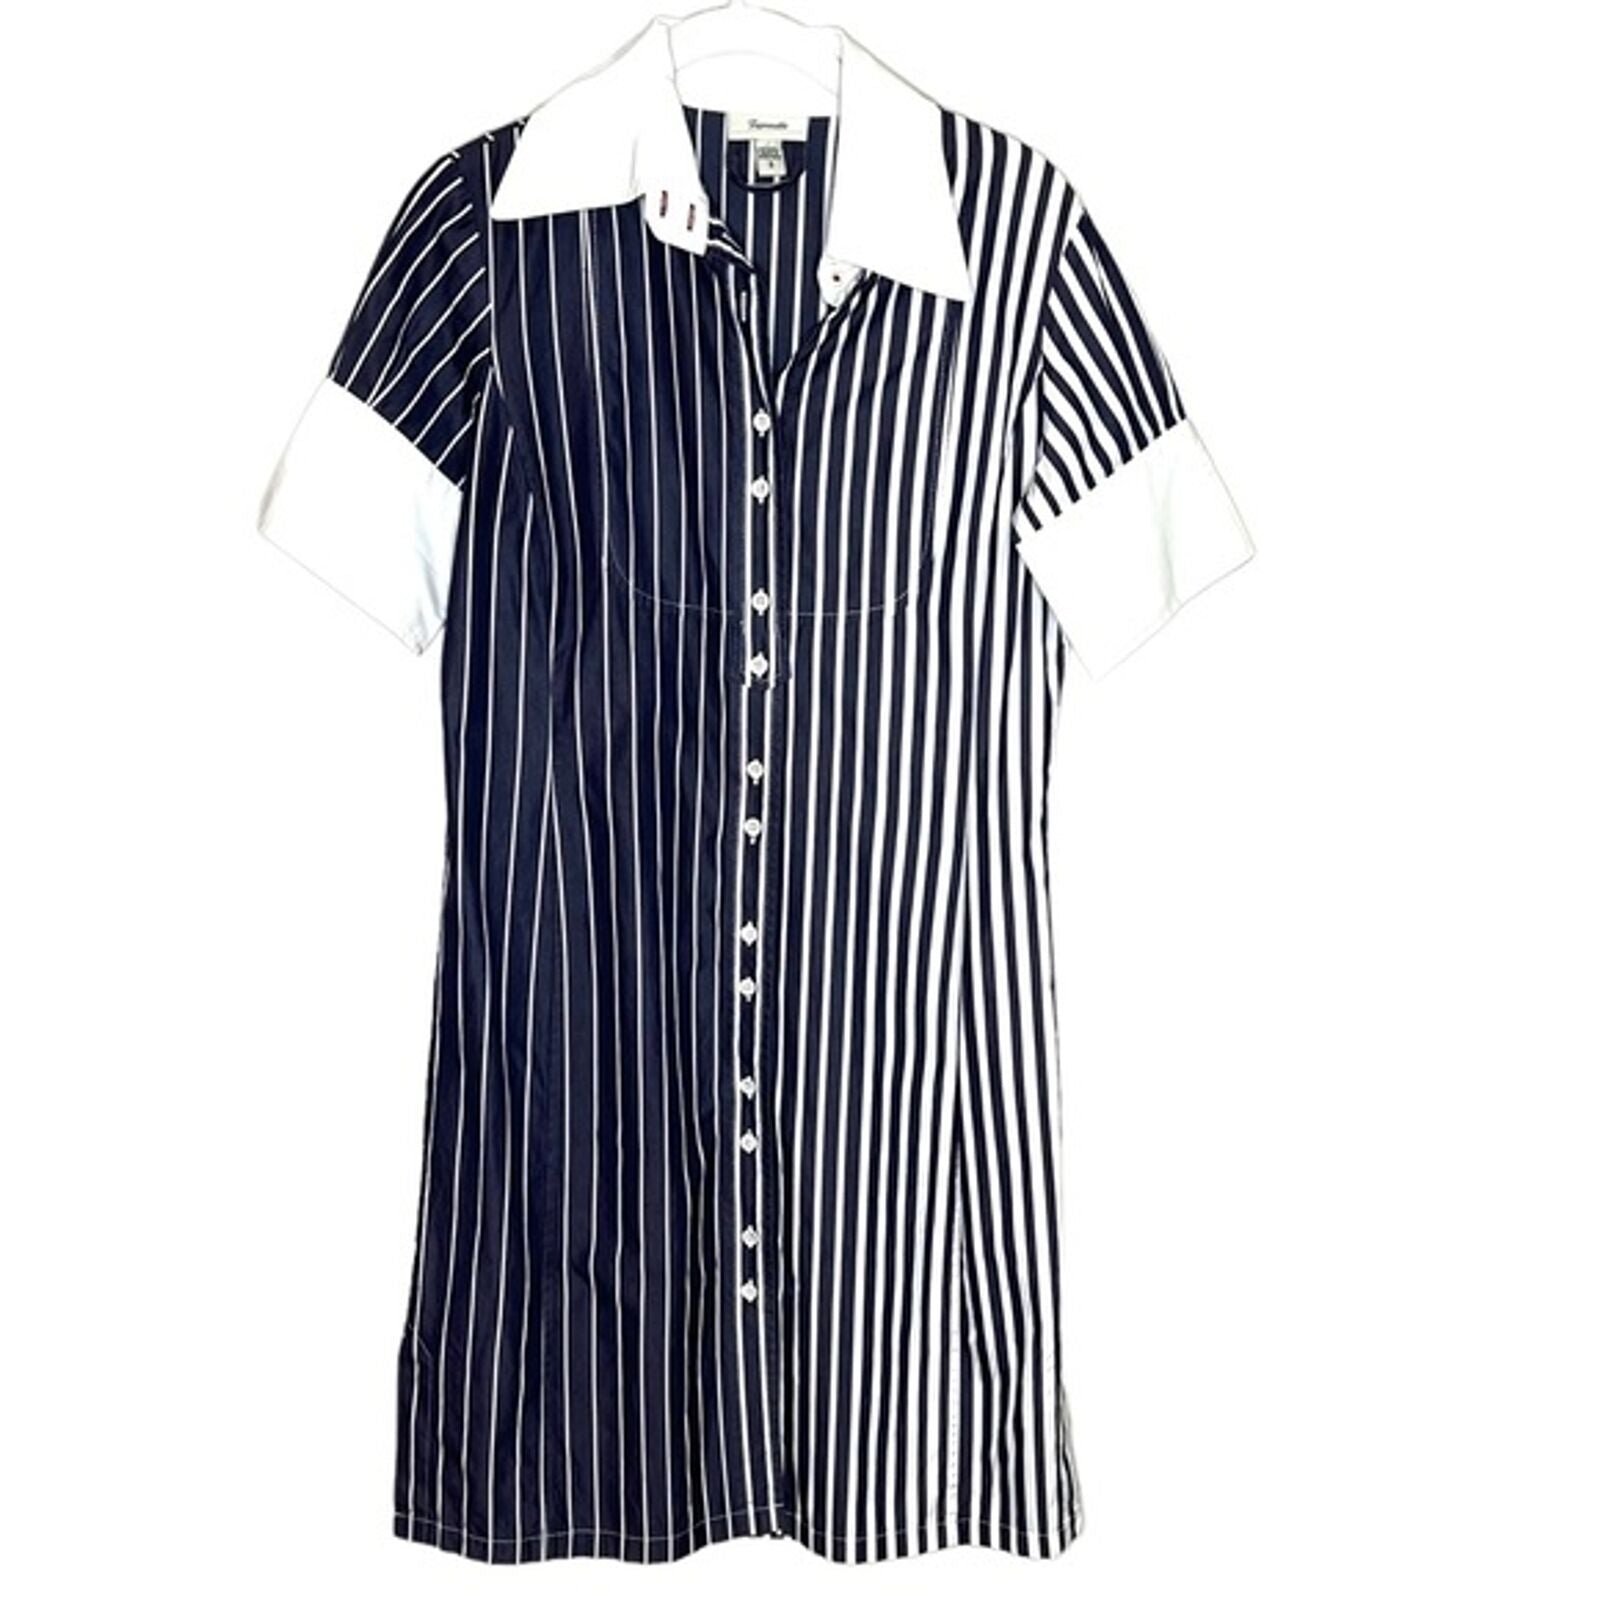 Faconnable Blue White Short Sleeve Shirt Dress in Stripe Size Small